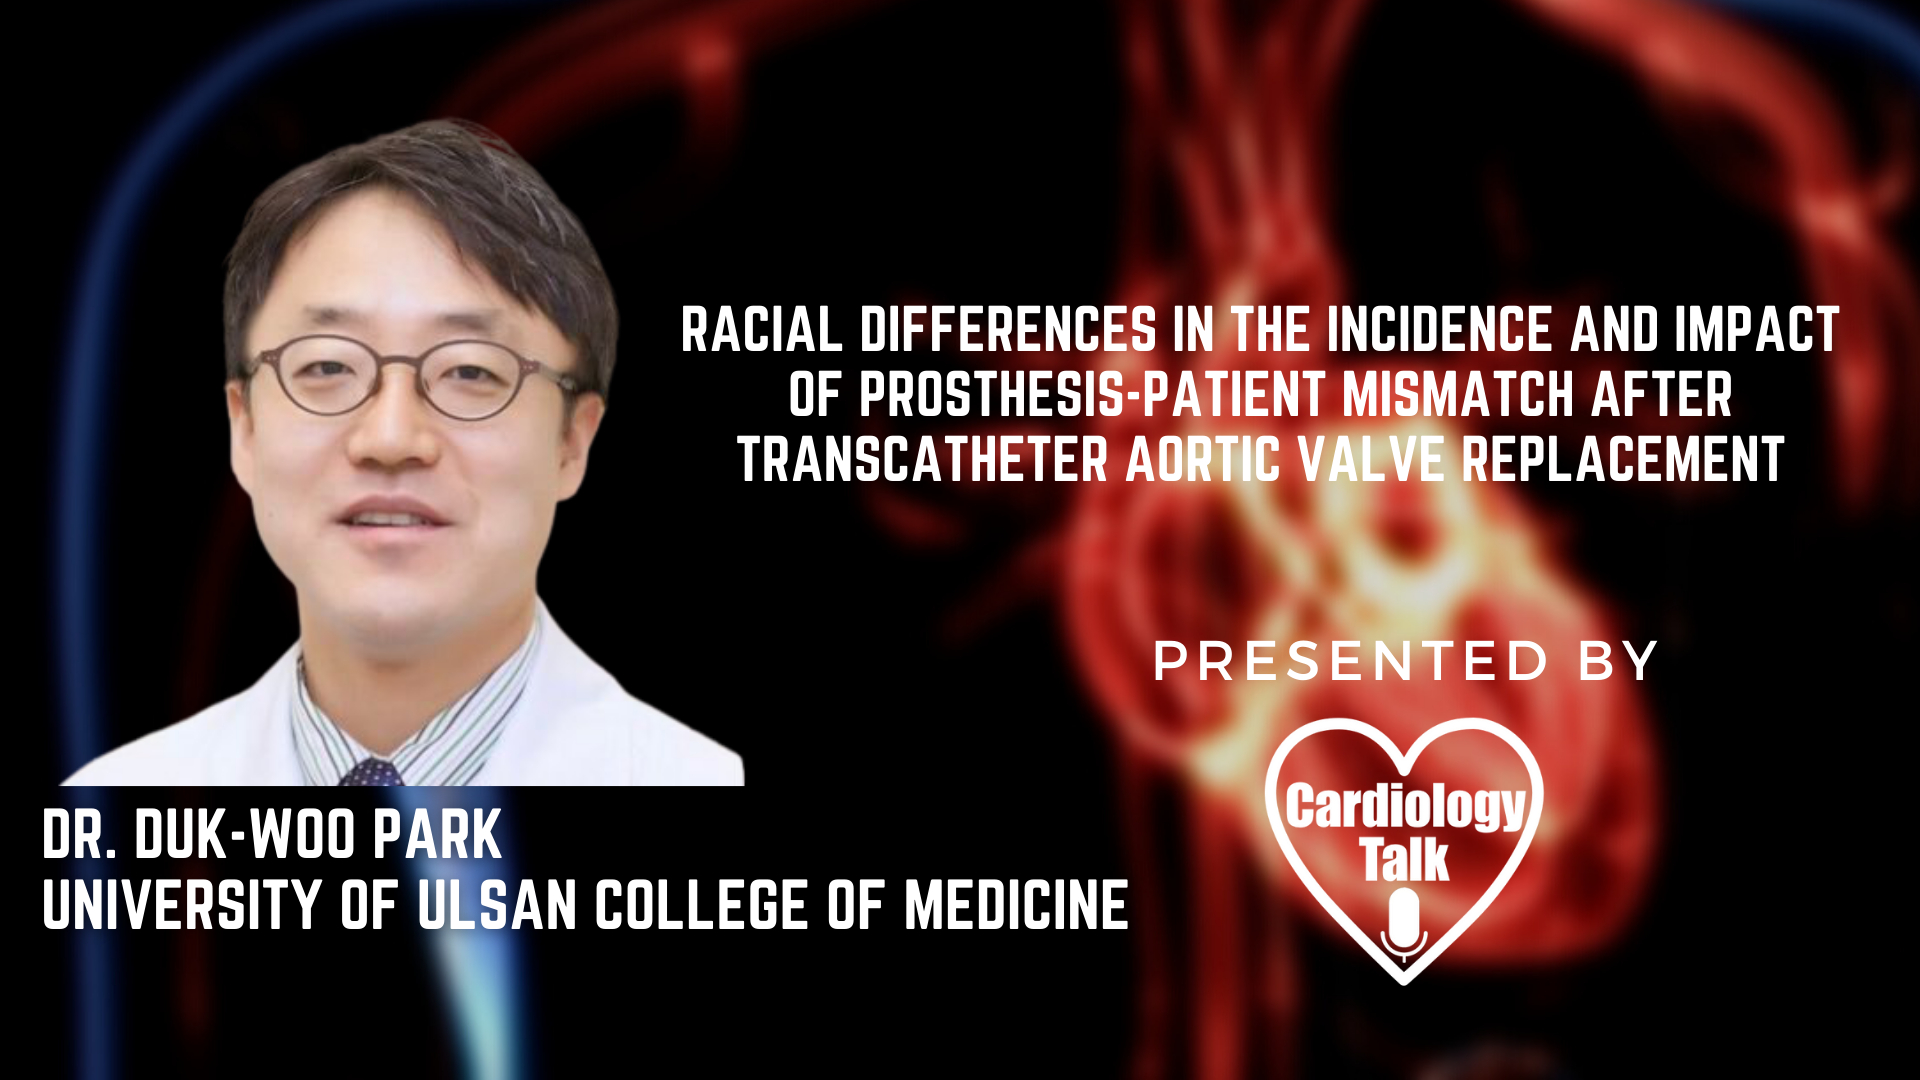 Dr. Duk-Woo Park, MD - Racial Differences in the Incidence and Impact of Prosthesis-Patient Mismatch After Transcatheter Aortic Valve Replacement